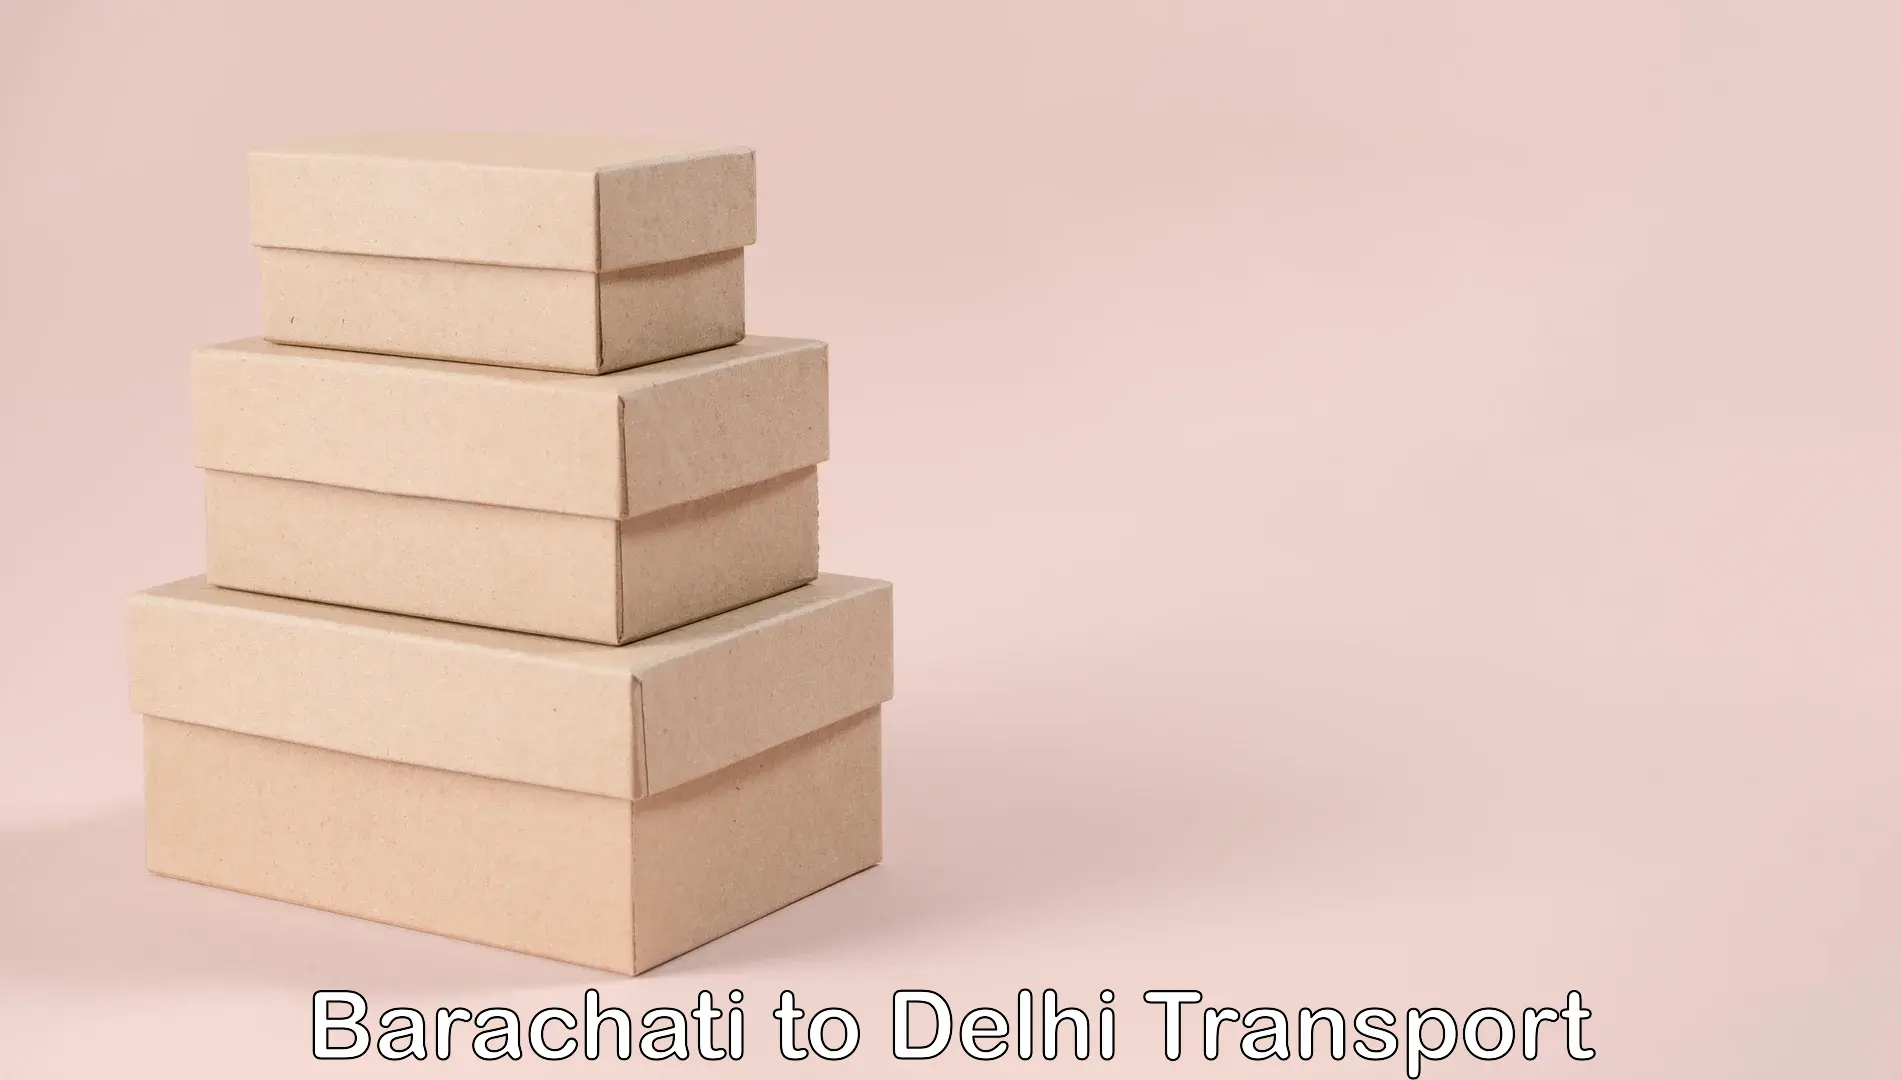 Truck transport companies in India Barachati to Lodhi Road